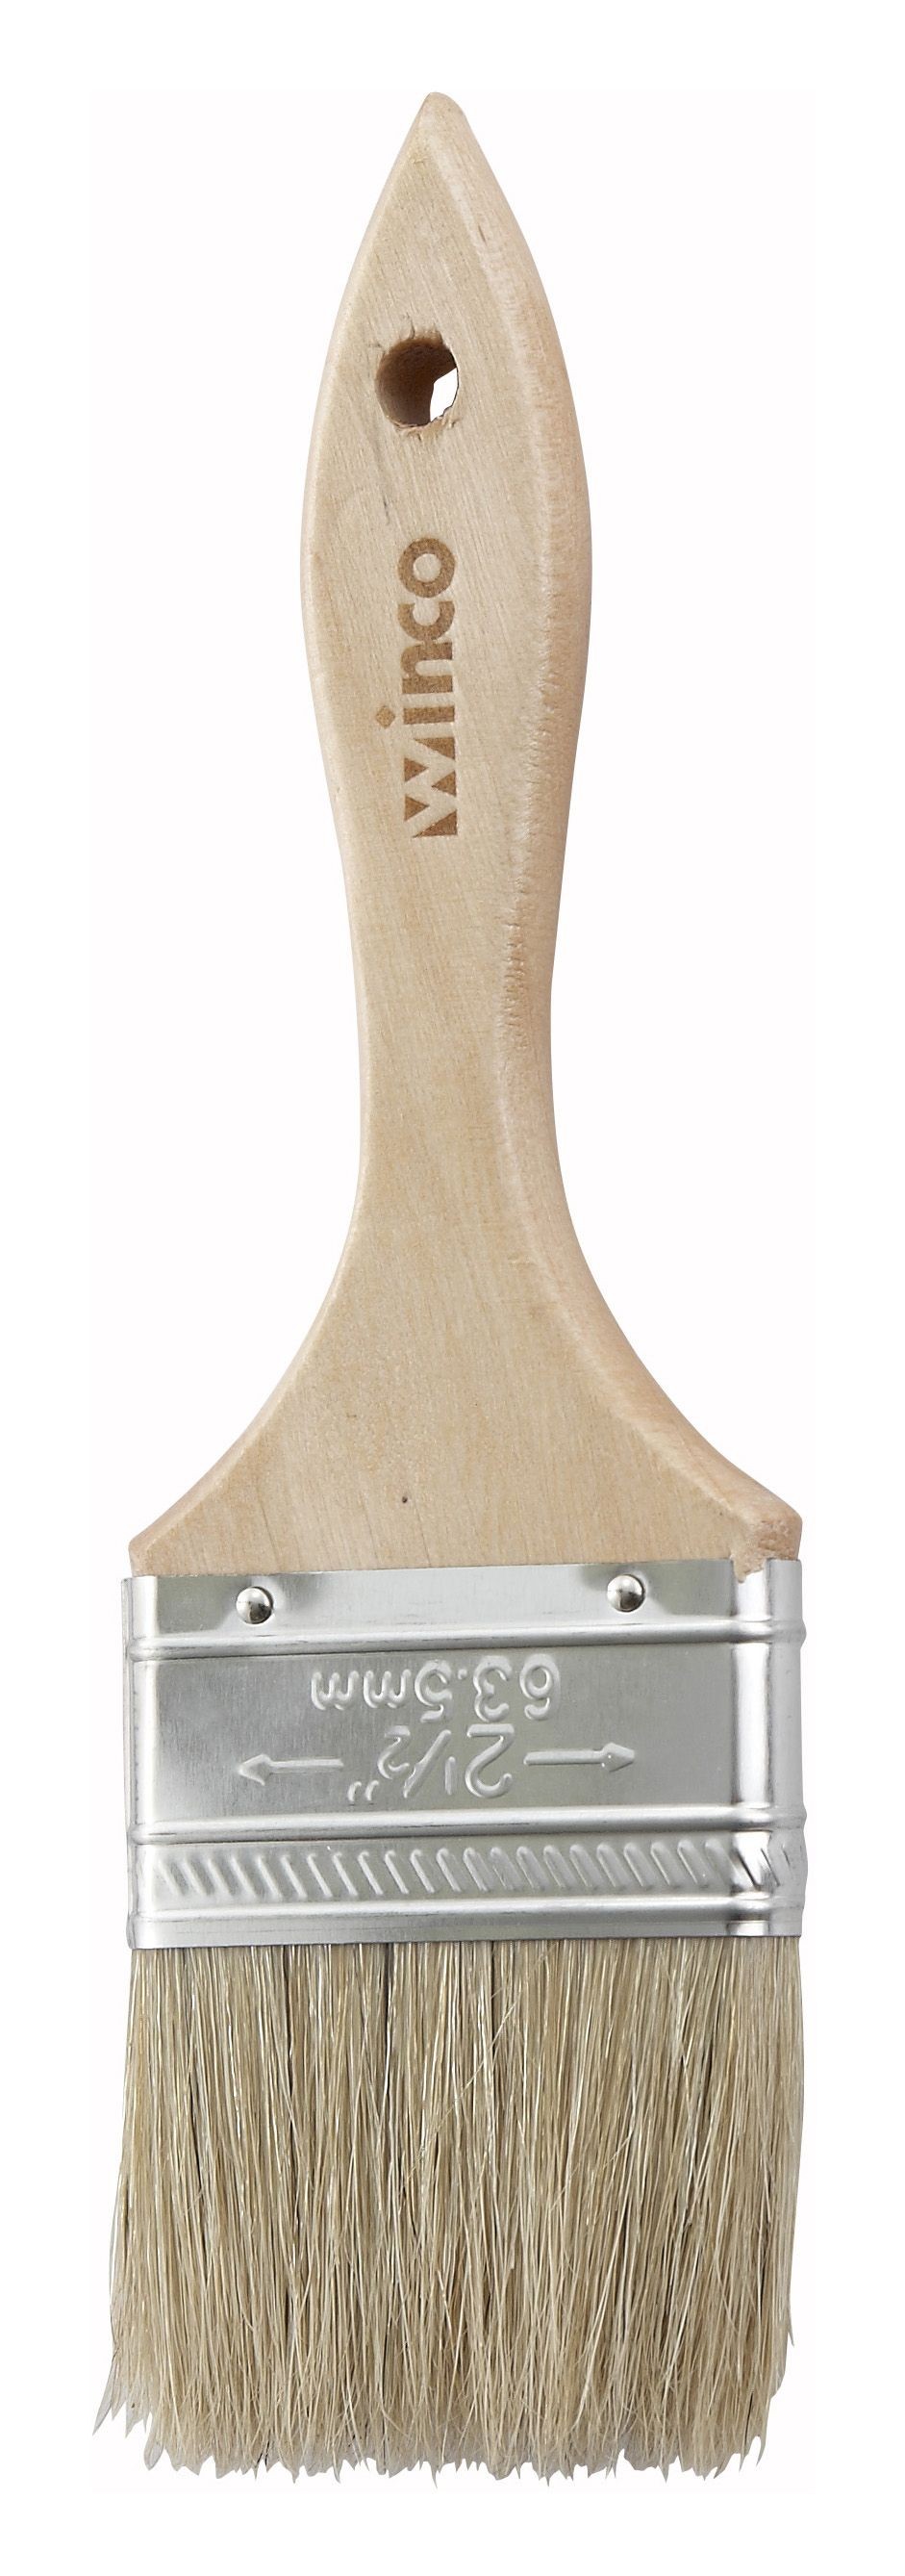 Winco WBR-25 2-1/2" Wide Flat Pastry Brush with Wooden Handle